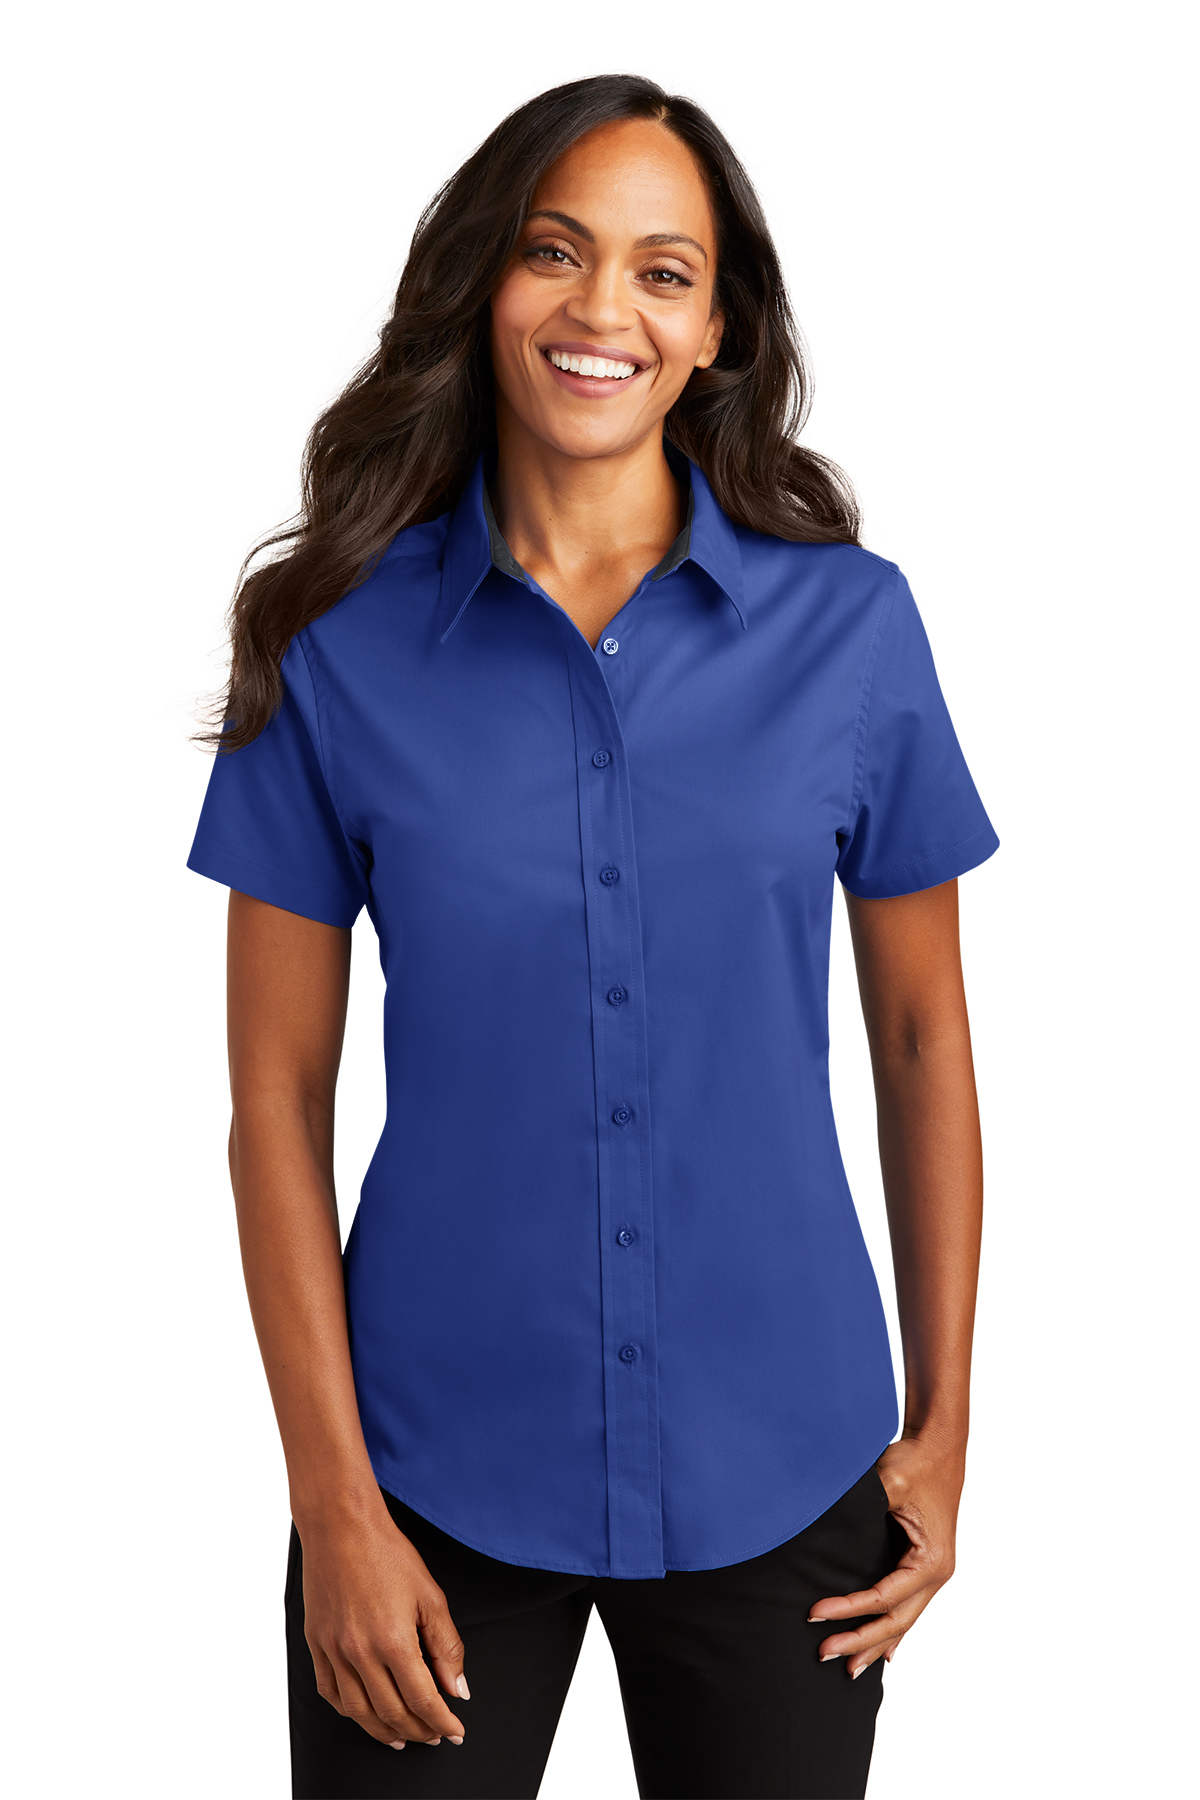 Port Authority Ladies Short Sleeve Easy Care Shirt | Product | Company ...